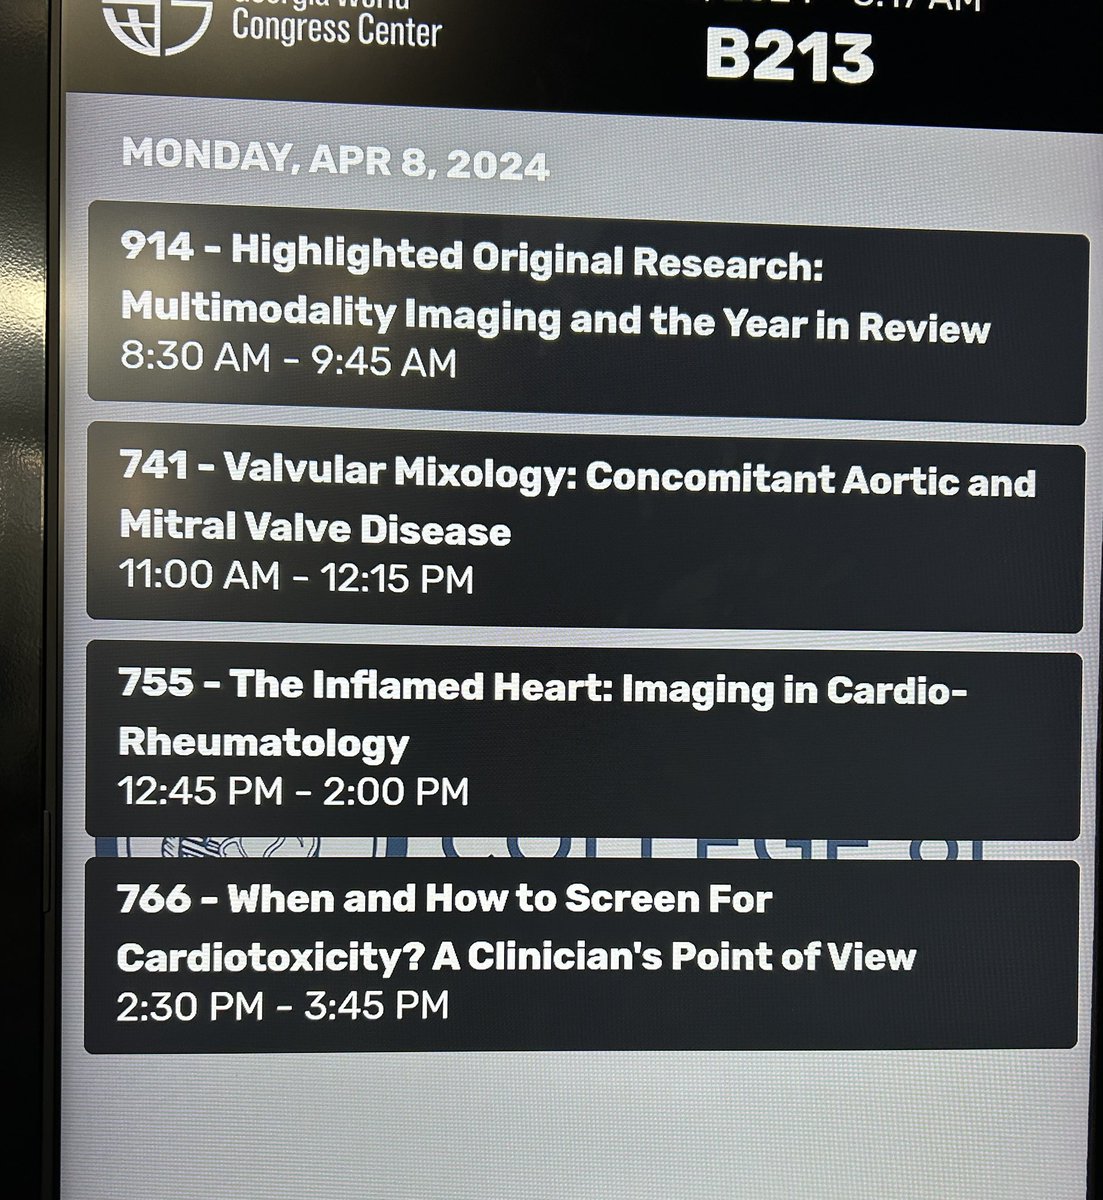 🚨🚨🚨 Monday at @ACCinTouch Room B213 is the place to be! Join us now for highlights in Multimodality Imaging Year in Review followed by amazing back to back sessions with @Bweber04 @Fentanes_MD